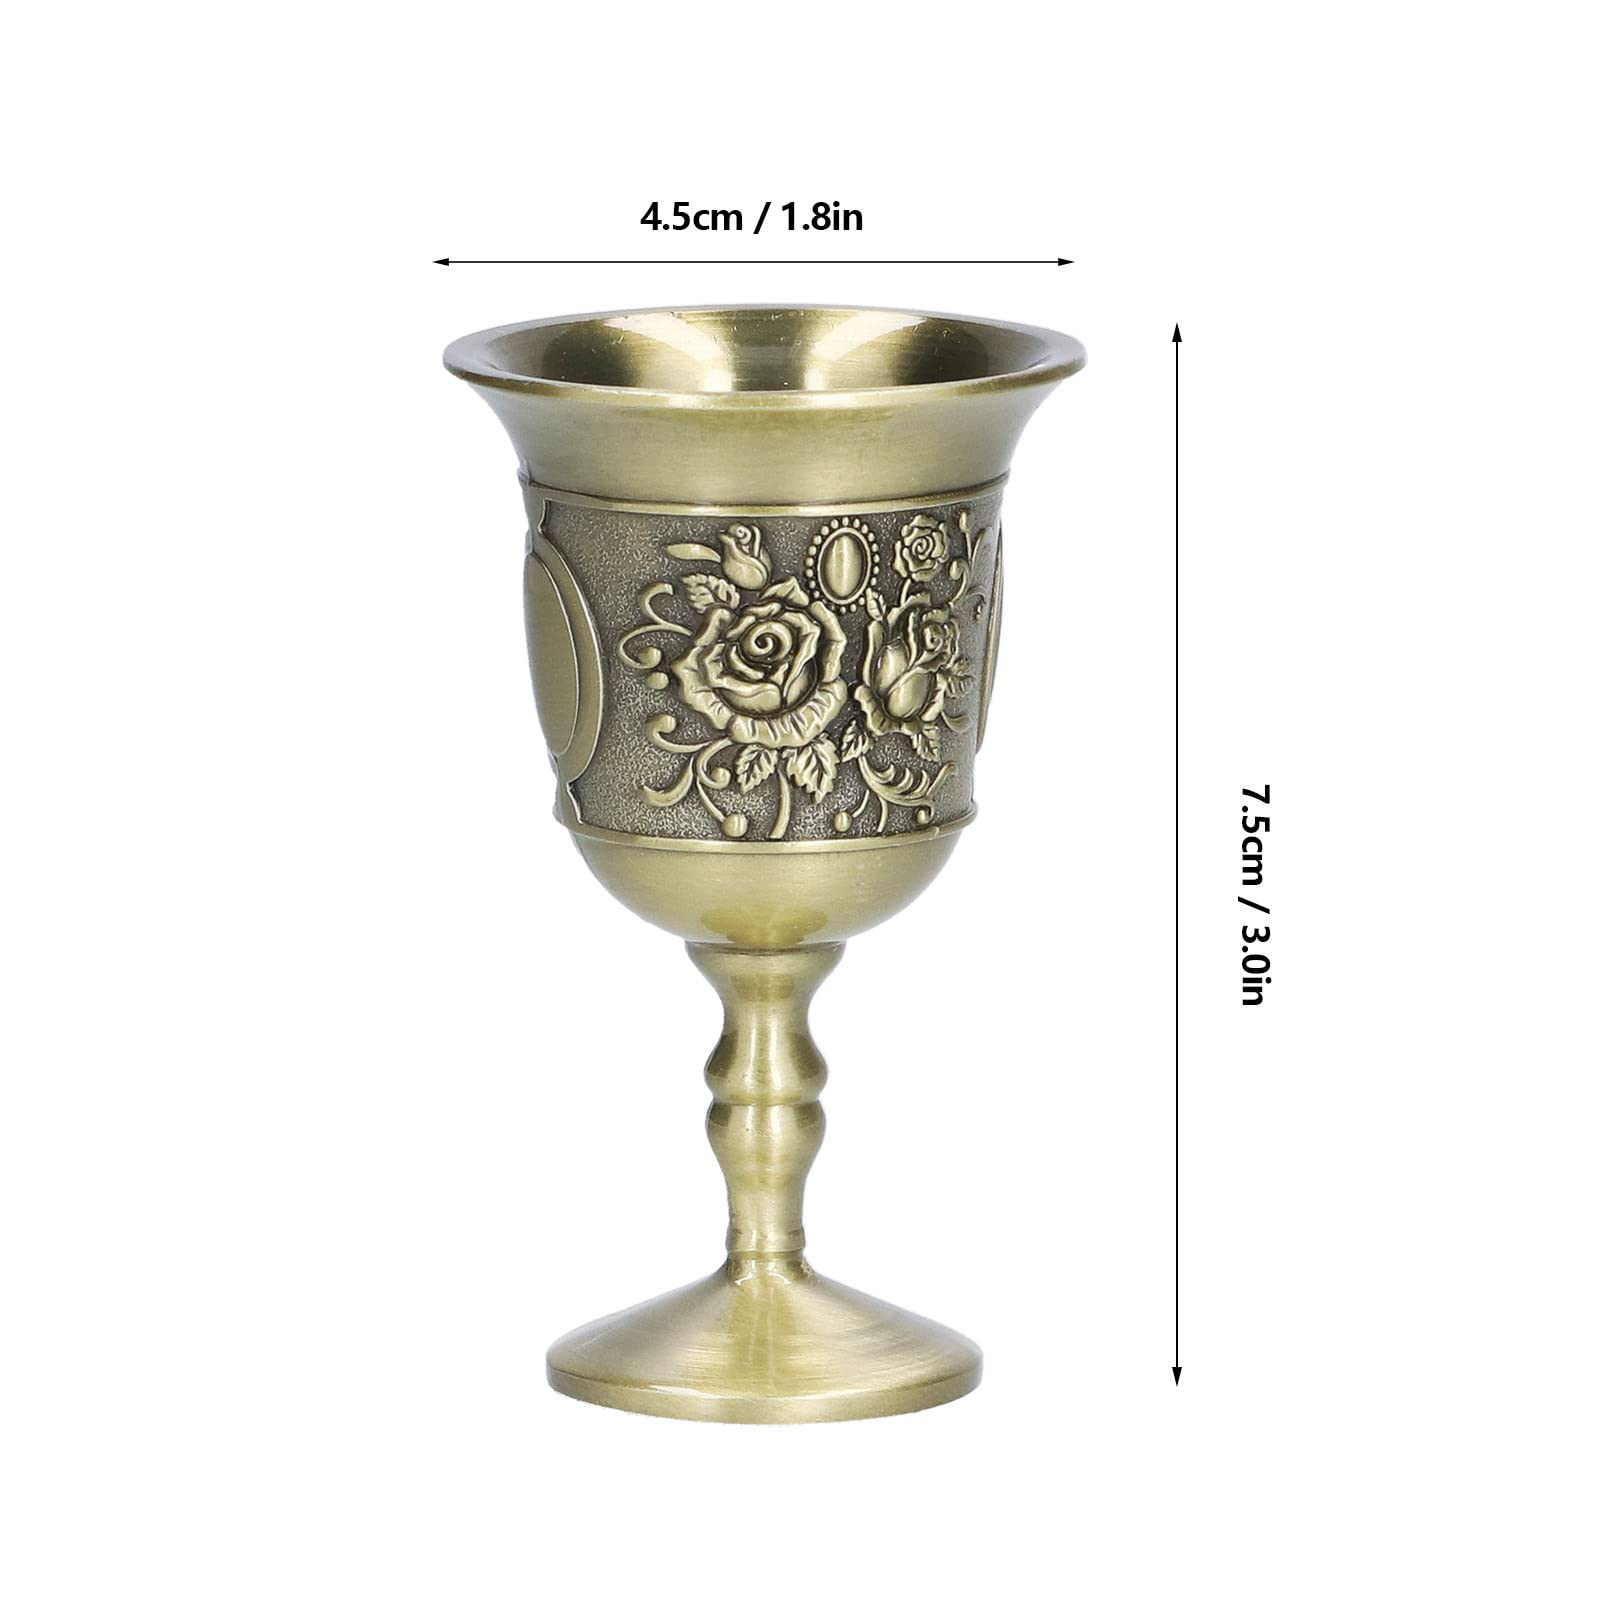 Jopwkuin Metal Drinking Glasses, Antique Goblet Wine Glass Luxury Small Wine Glass European Style Old Wine Glass for Weddings Home Decor Cup for Home Party Dinner Bar